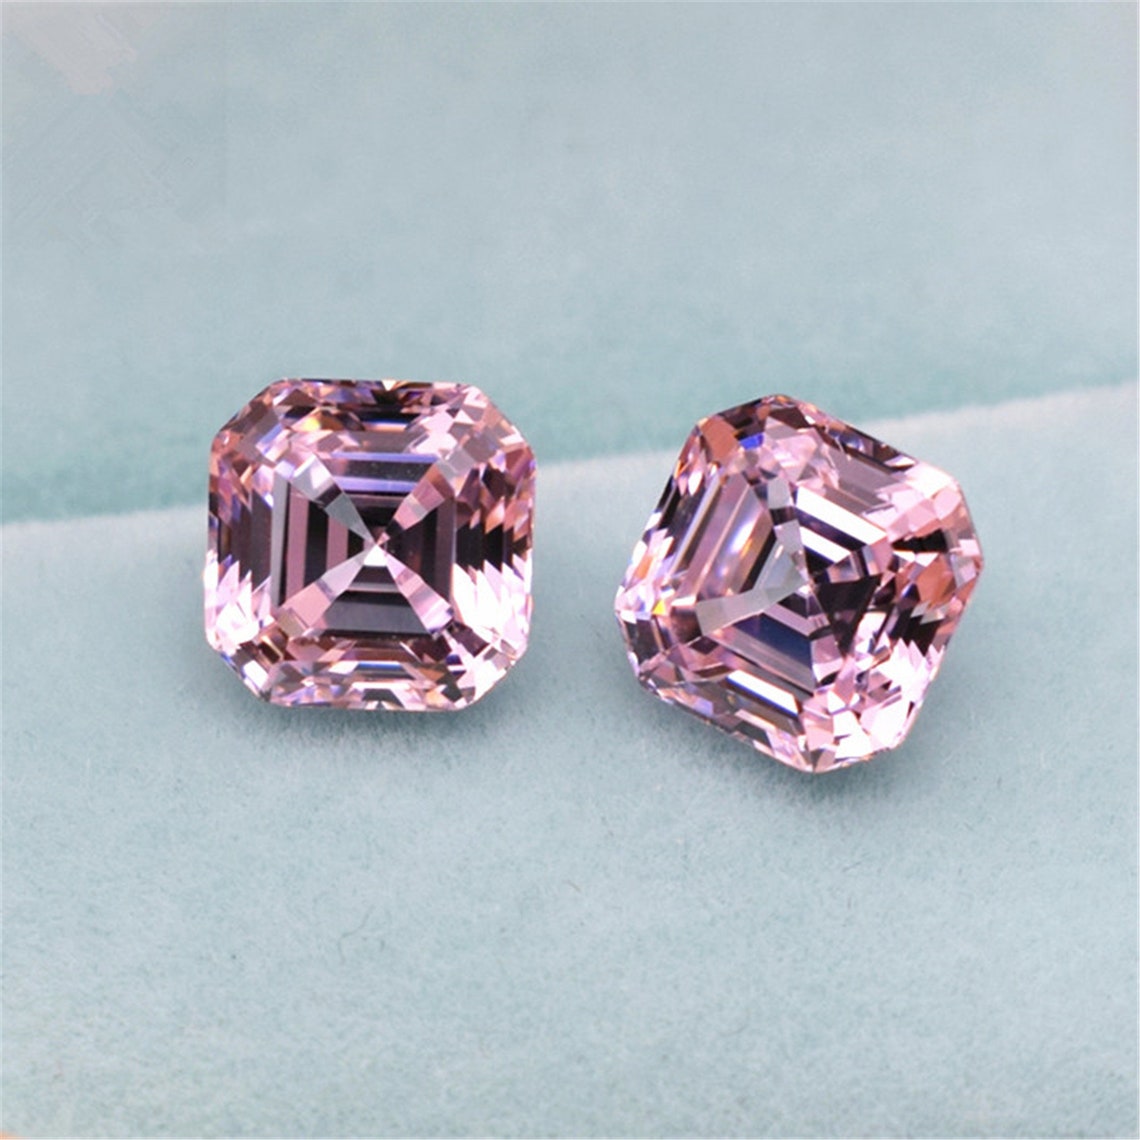 Grade AAA Light Pink Cubic Zirconia Square Faceted Gemstone - Etsy